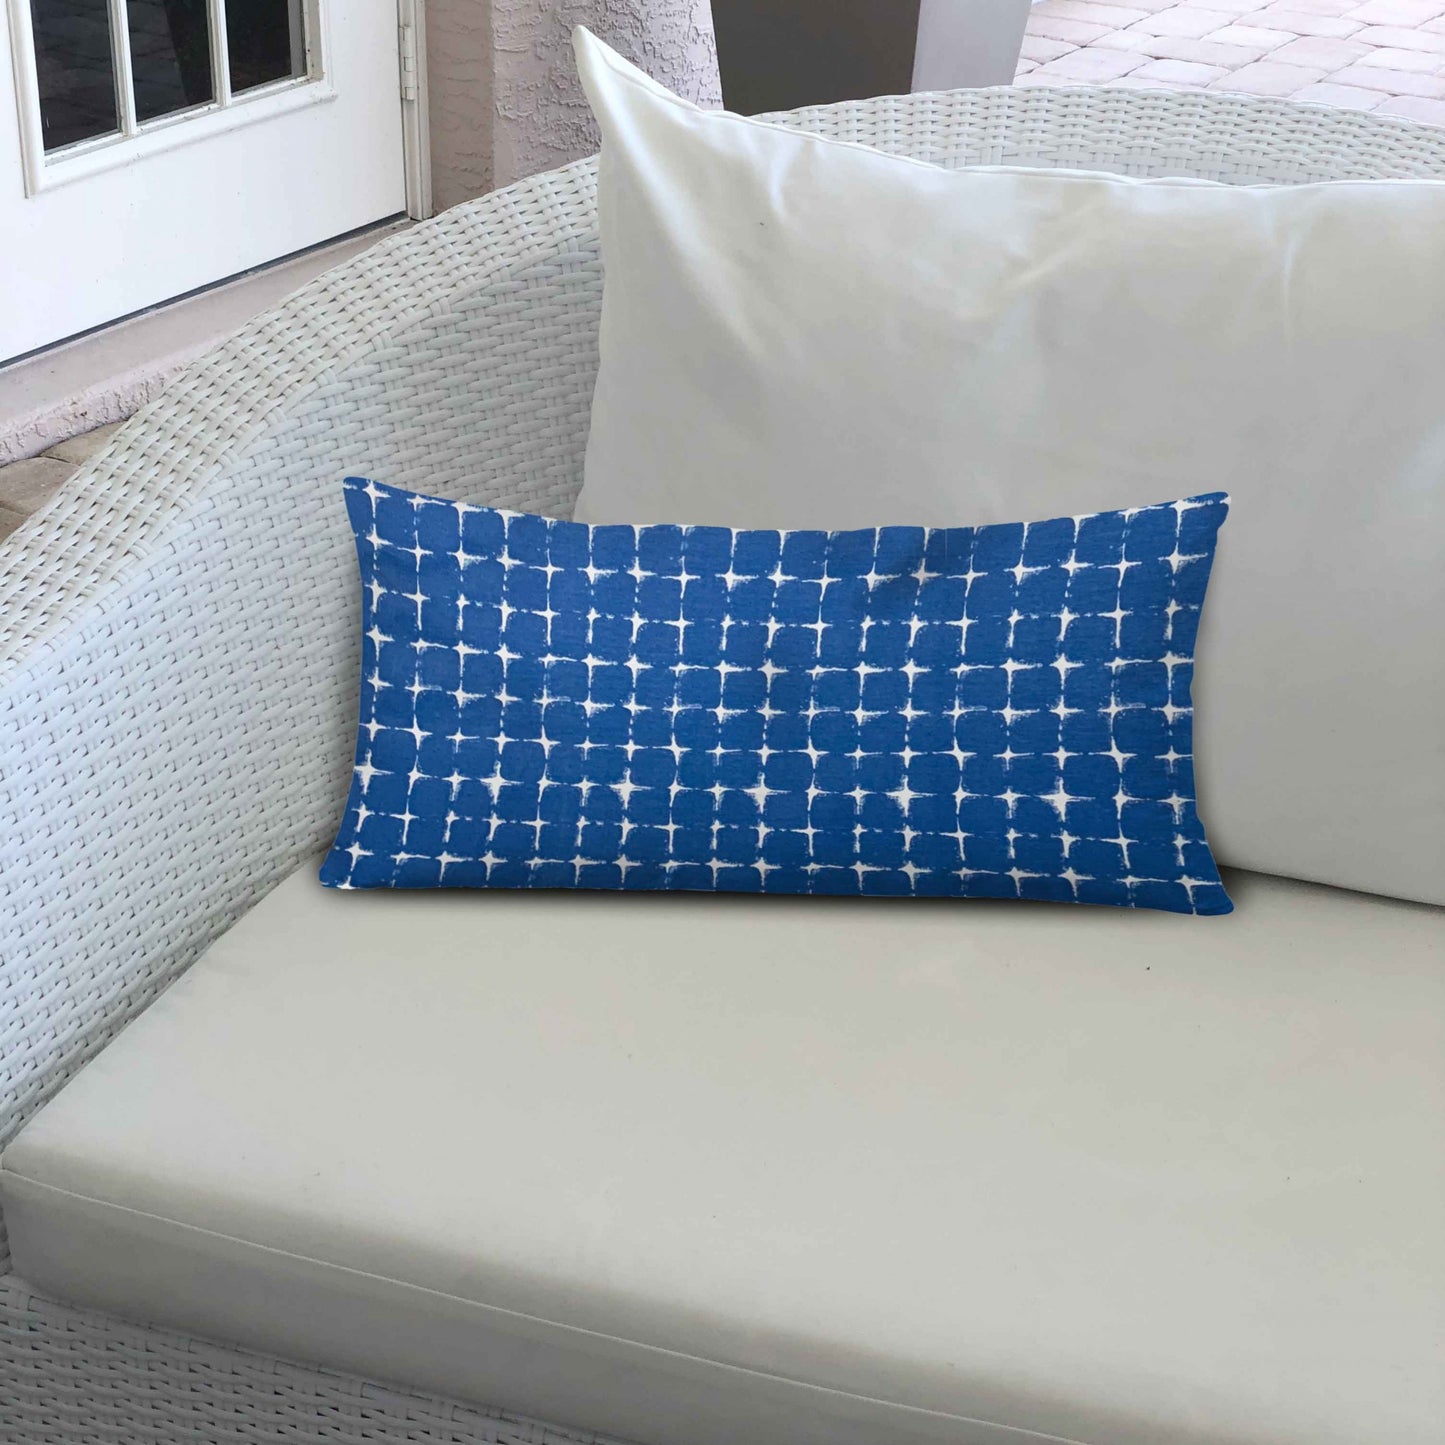 12" X 18" Blue And White Zippered Gingham Lumbar Indoor Outdoor Pillow